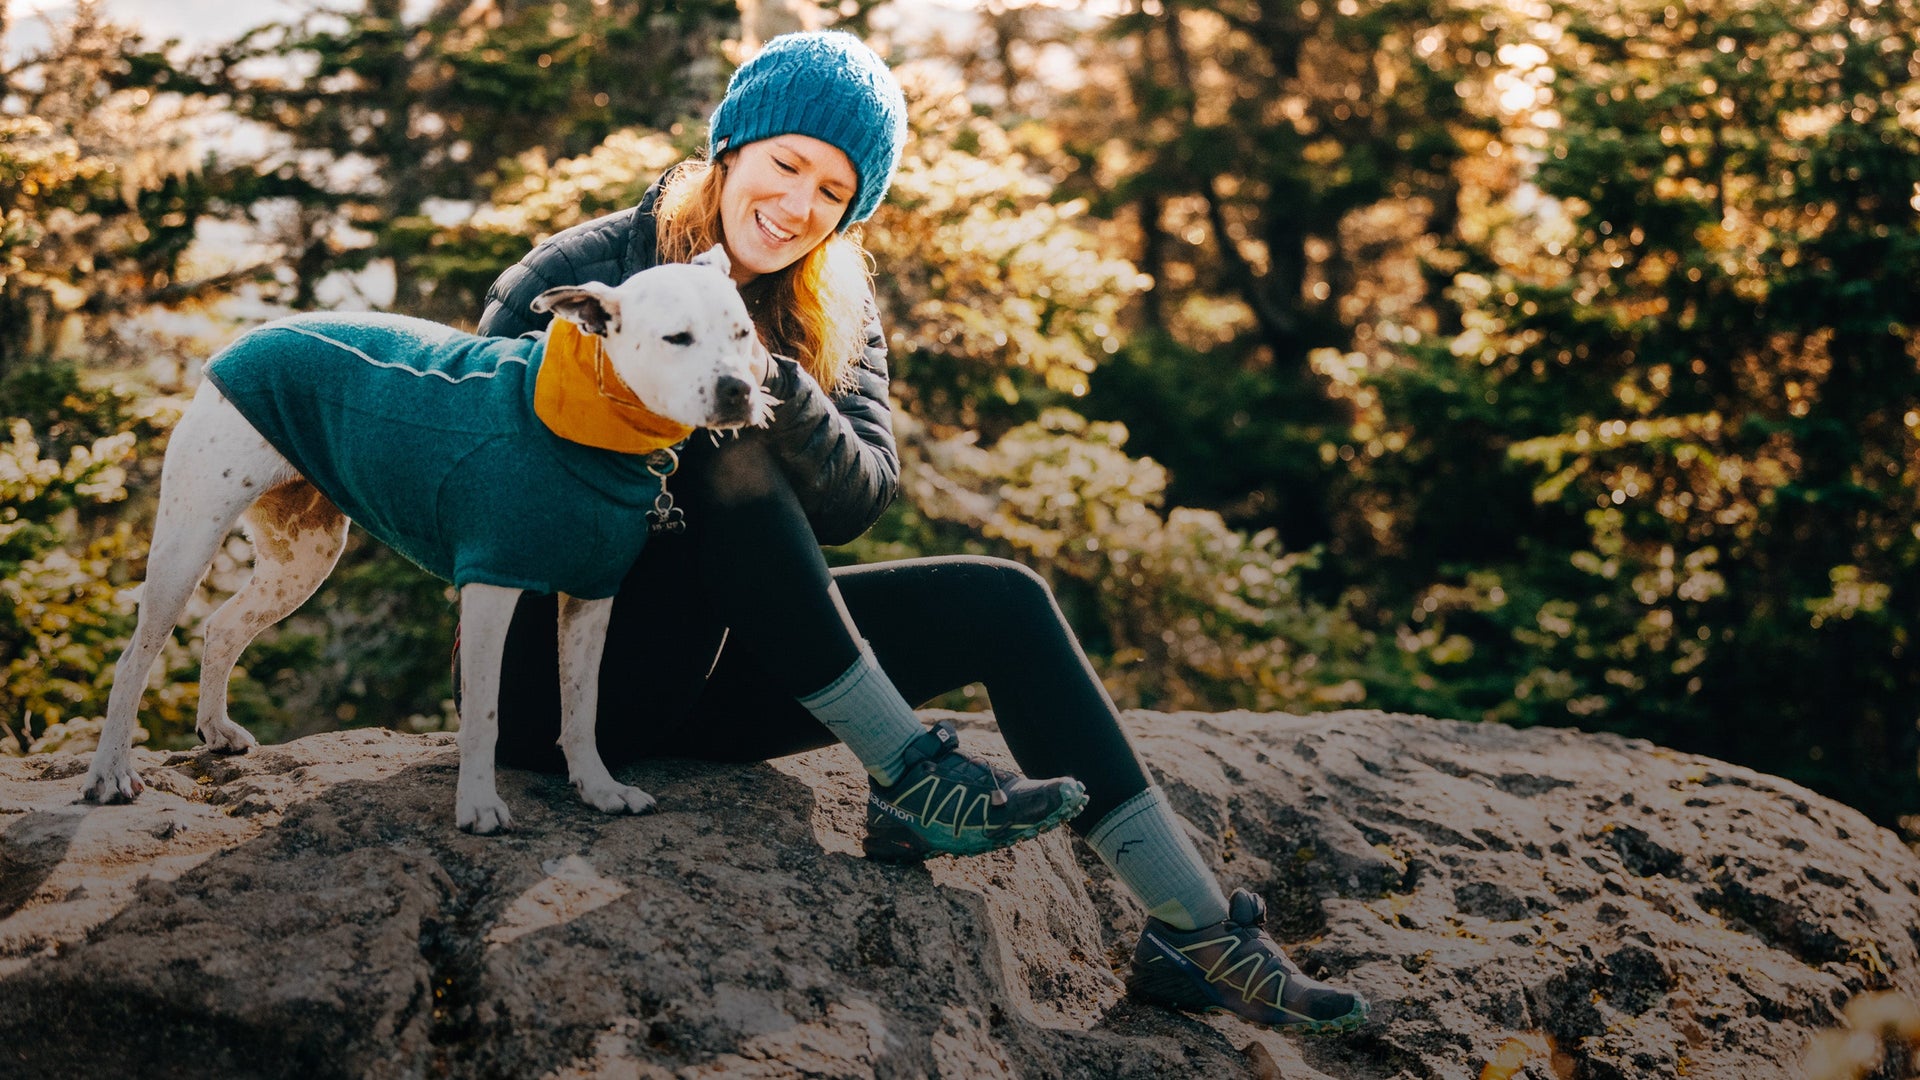 Woman out hiking with her adorable dog. She's wearing blue women's socks